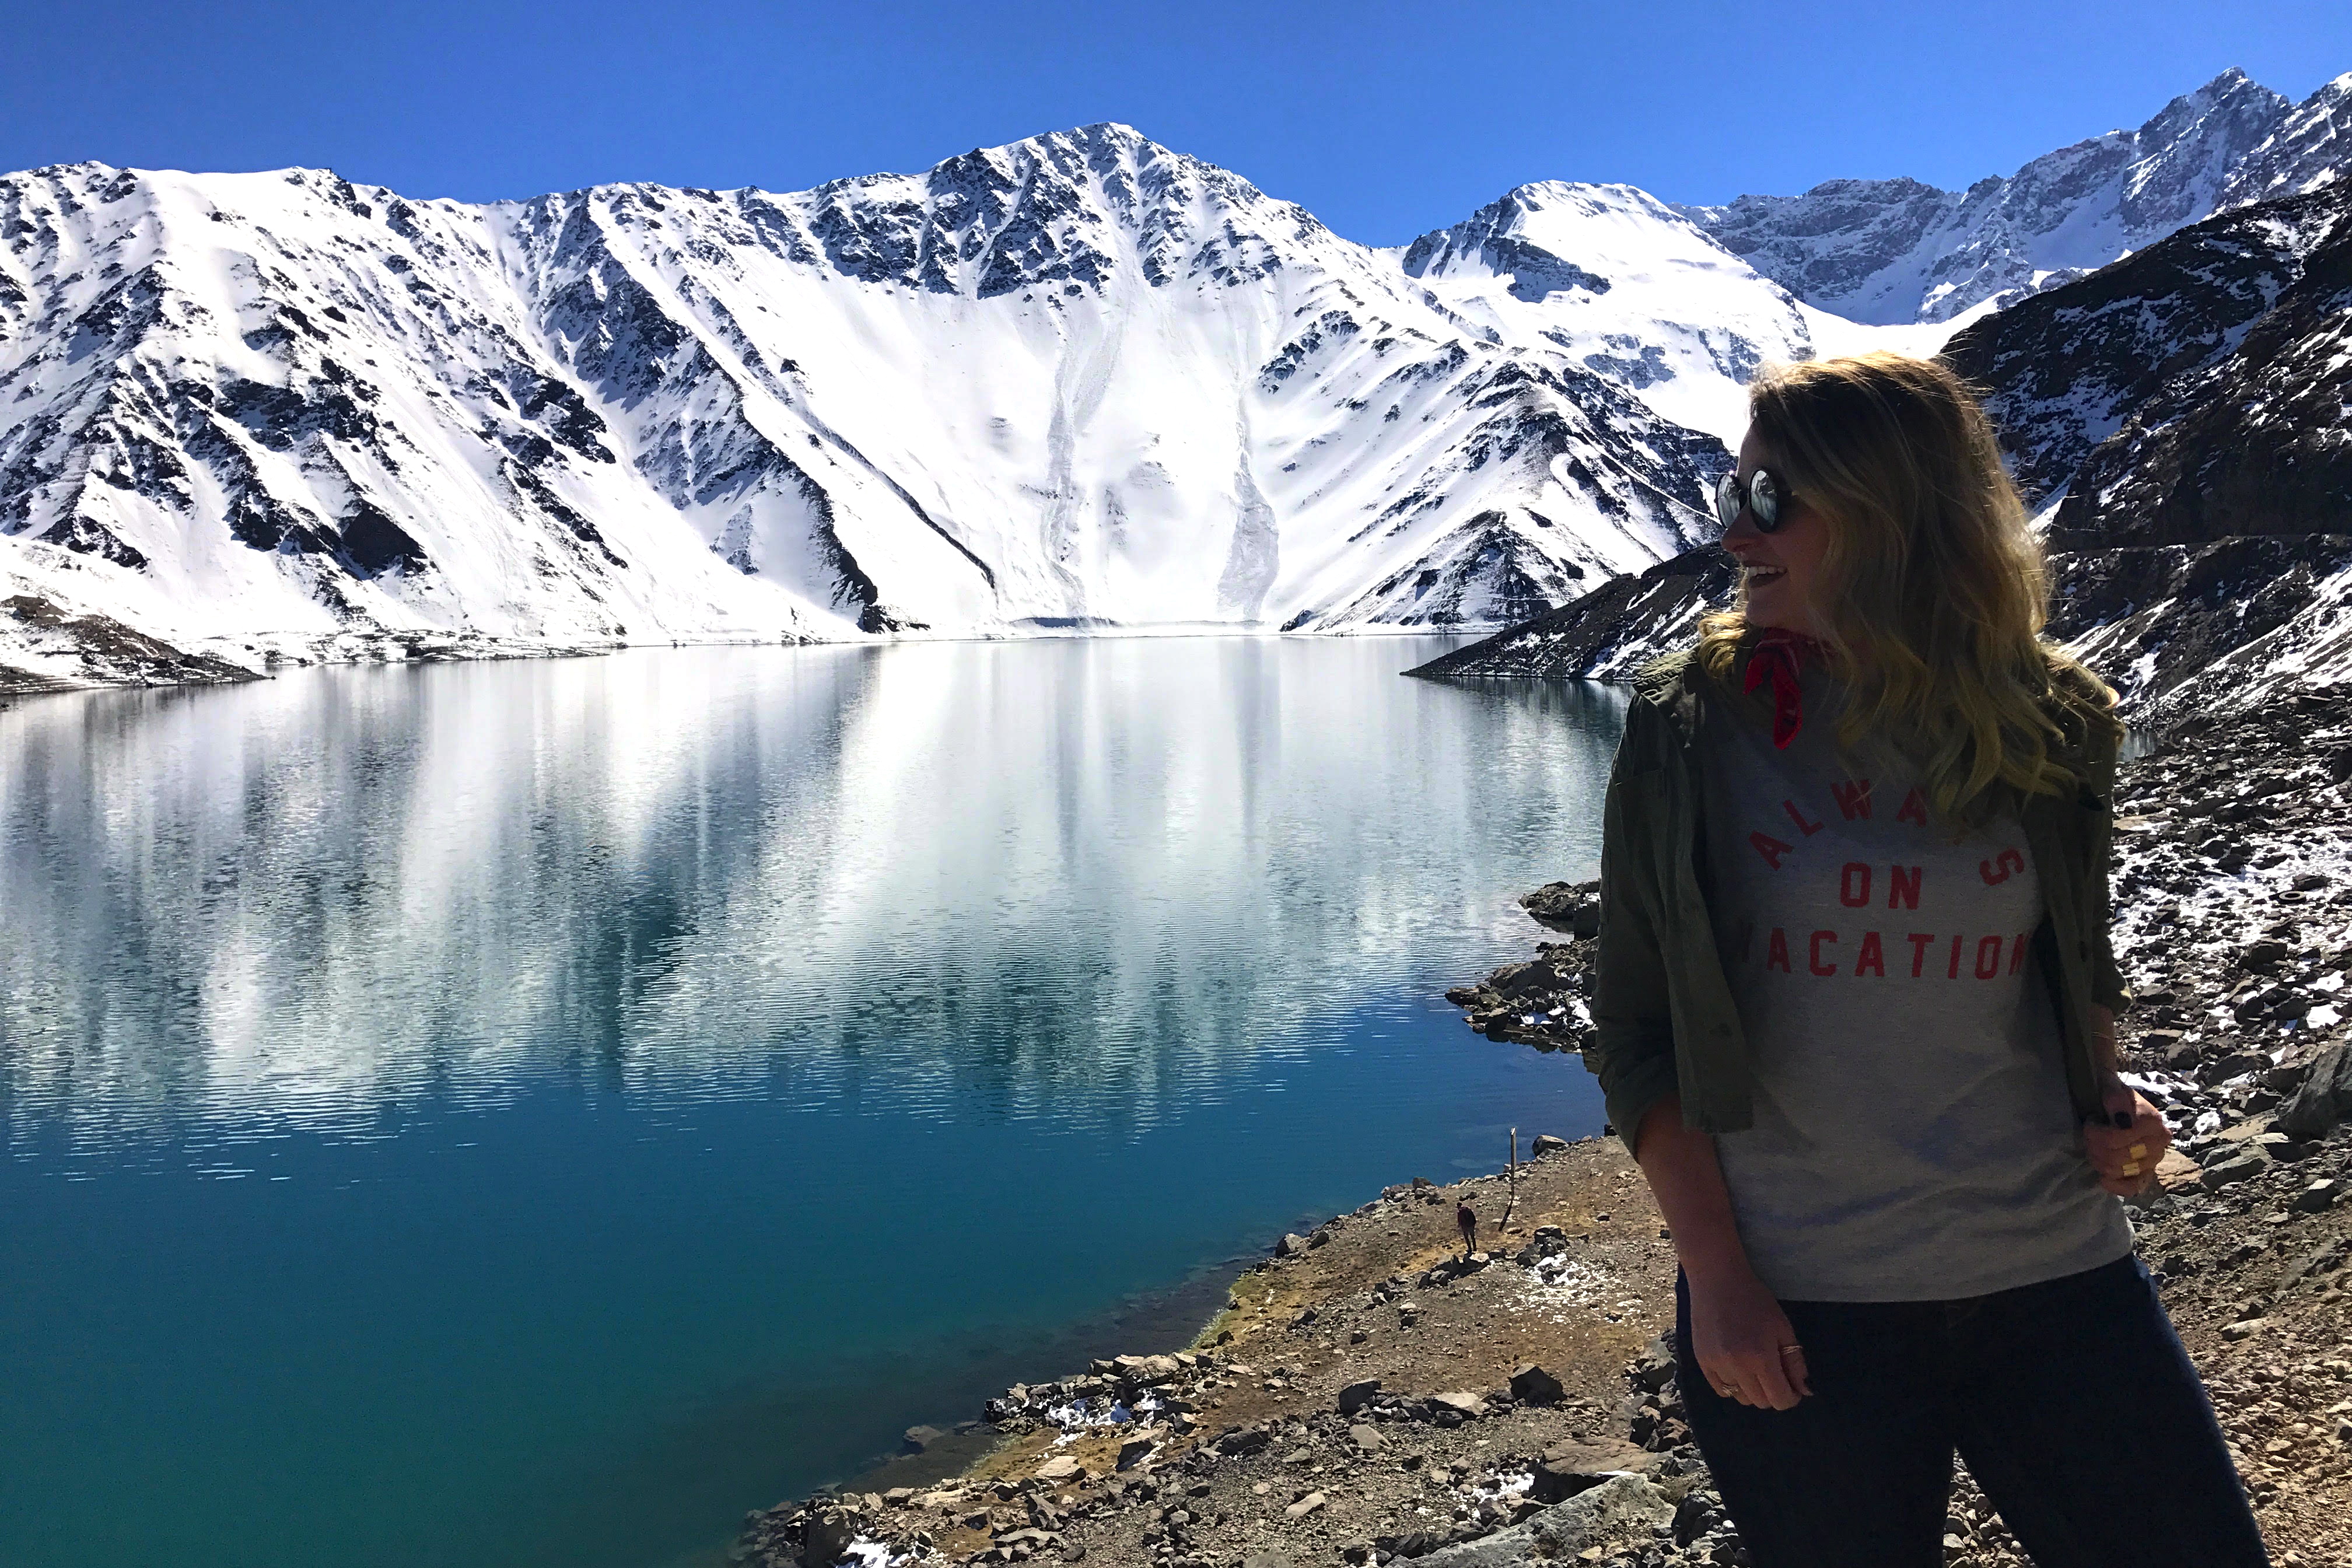 a woman standing next to a body of water with snow covered mountains in the background